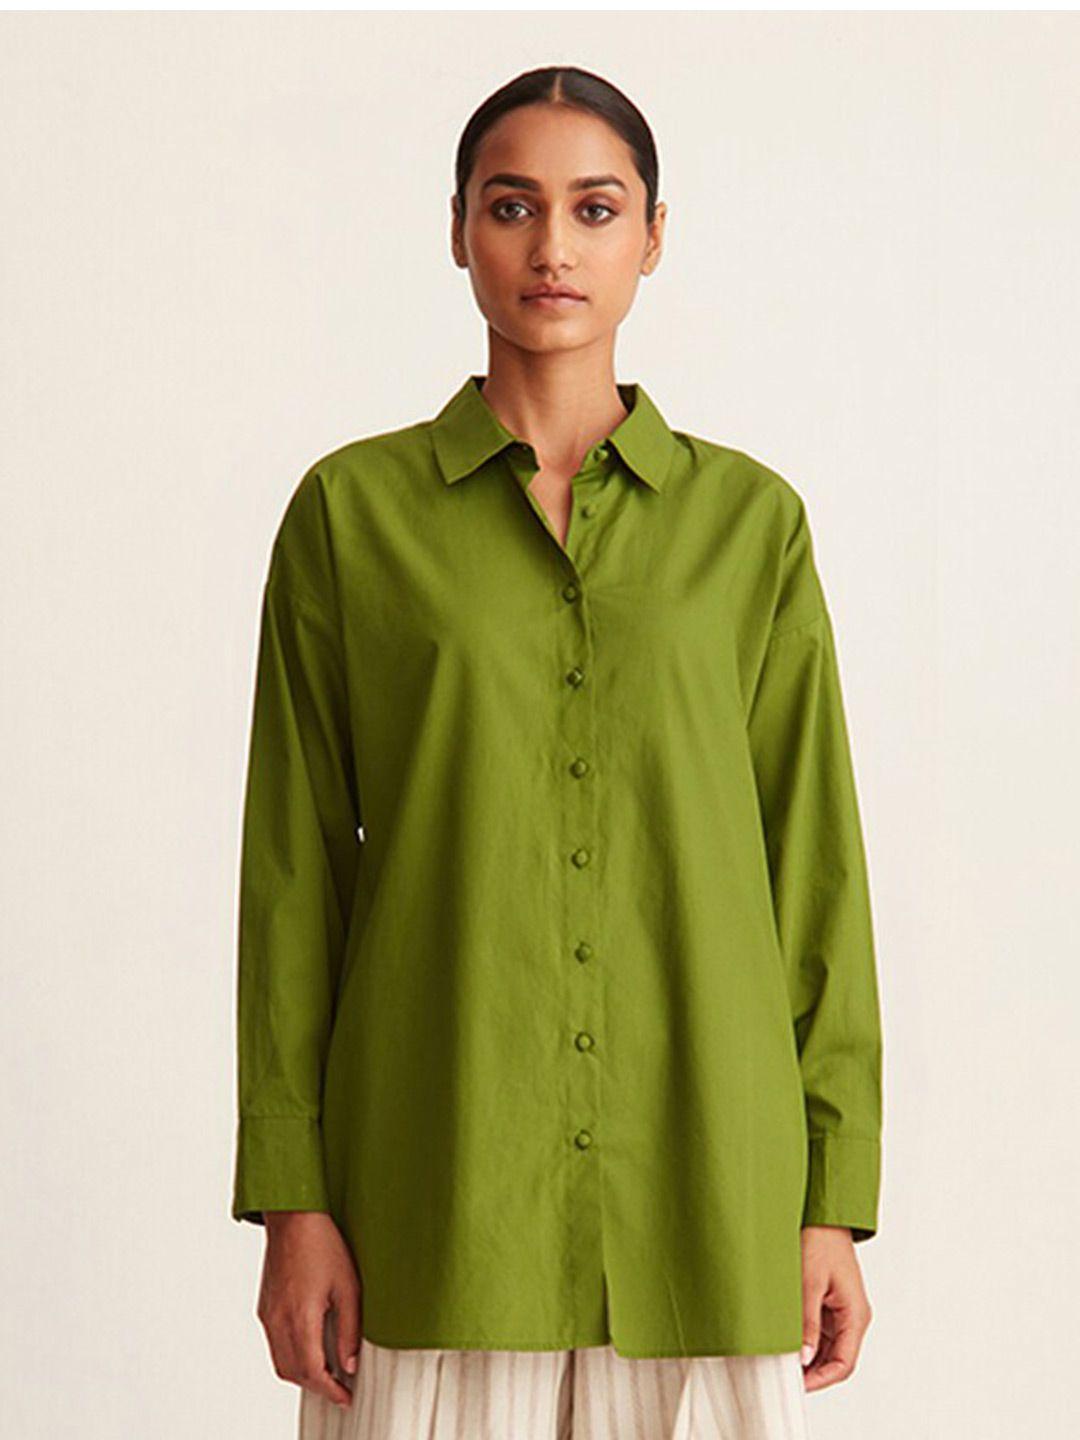 ancestry green shirt style top